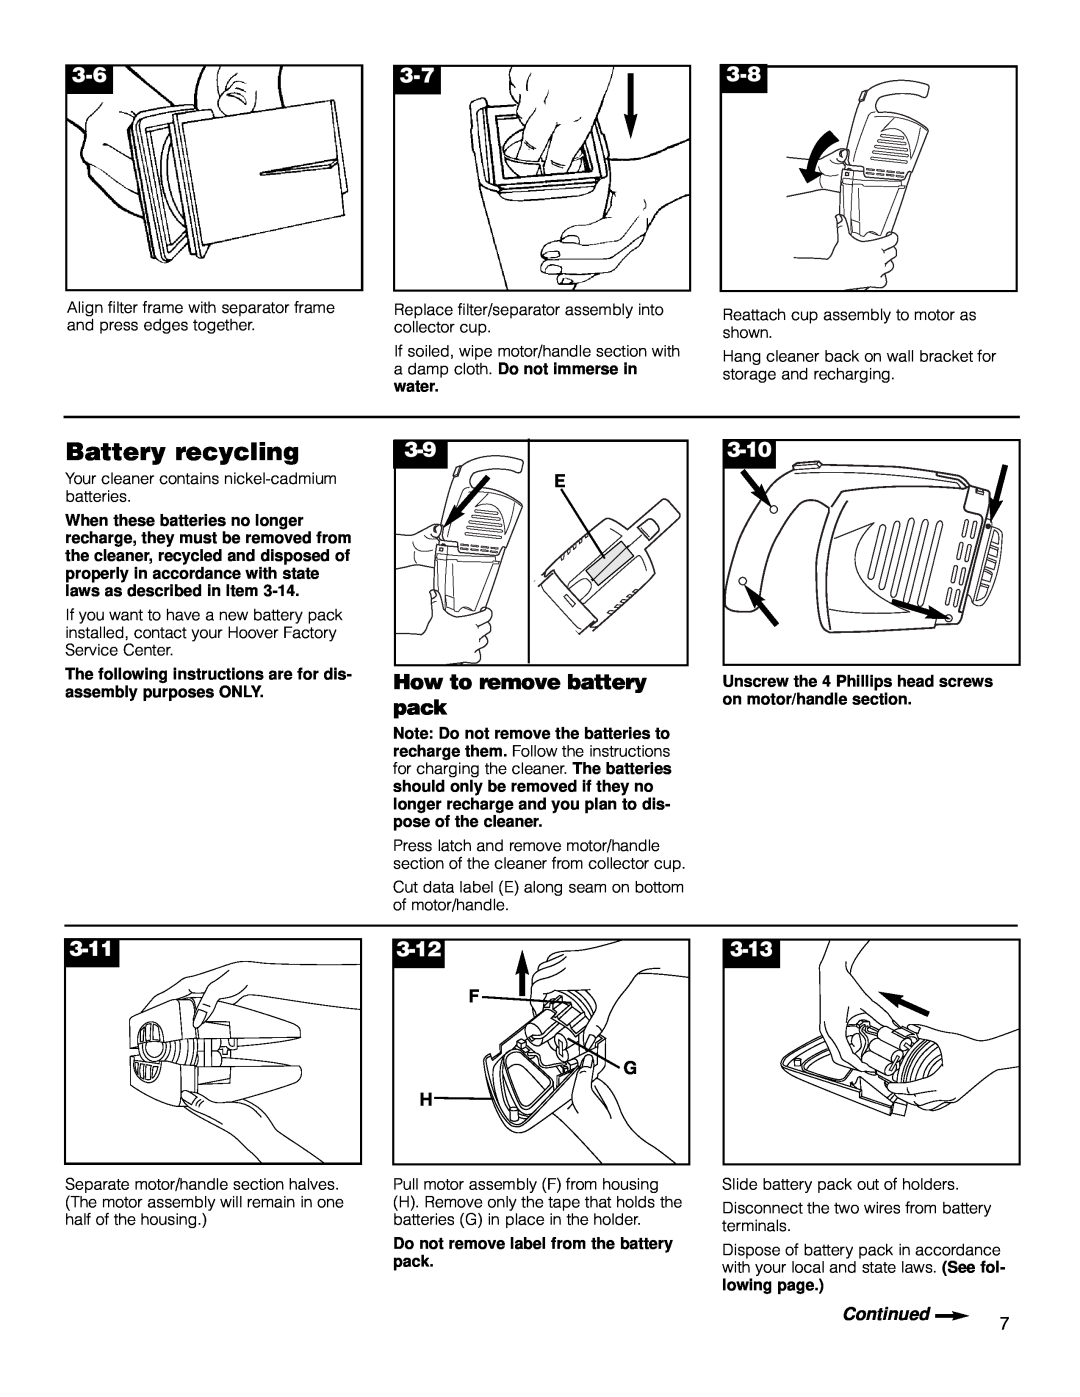 Hoover HandVac owner manual Battery recycling, How to remove battery pack, 3-10, 3-11, 3-12, 3-13, Continued 